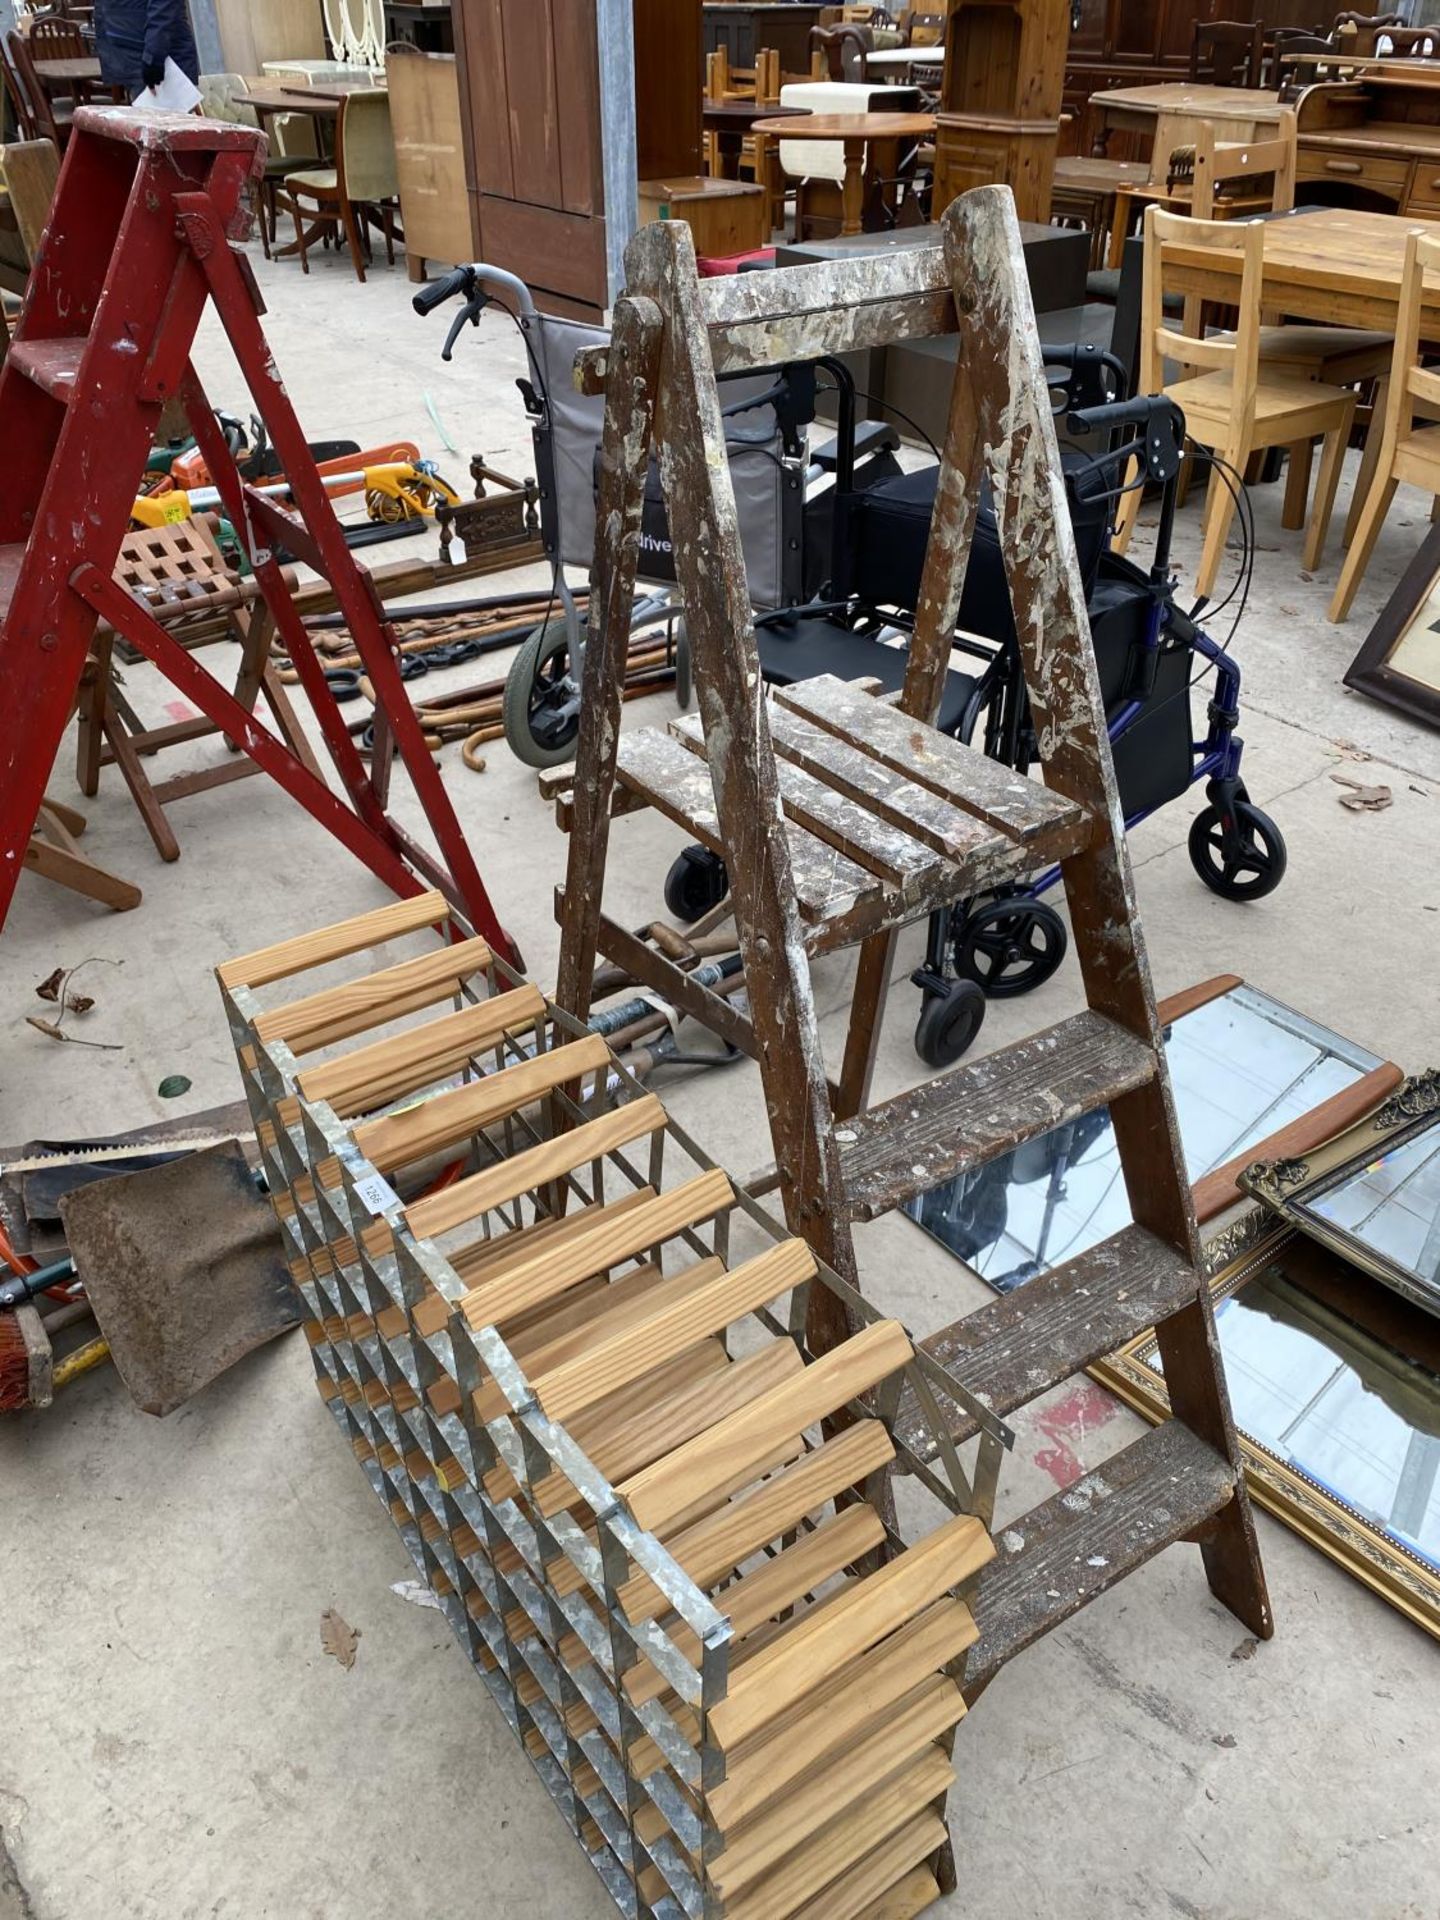 A SET OF VINTAGE WOODEN STEP LADDERS AND A WINE RACK